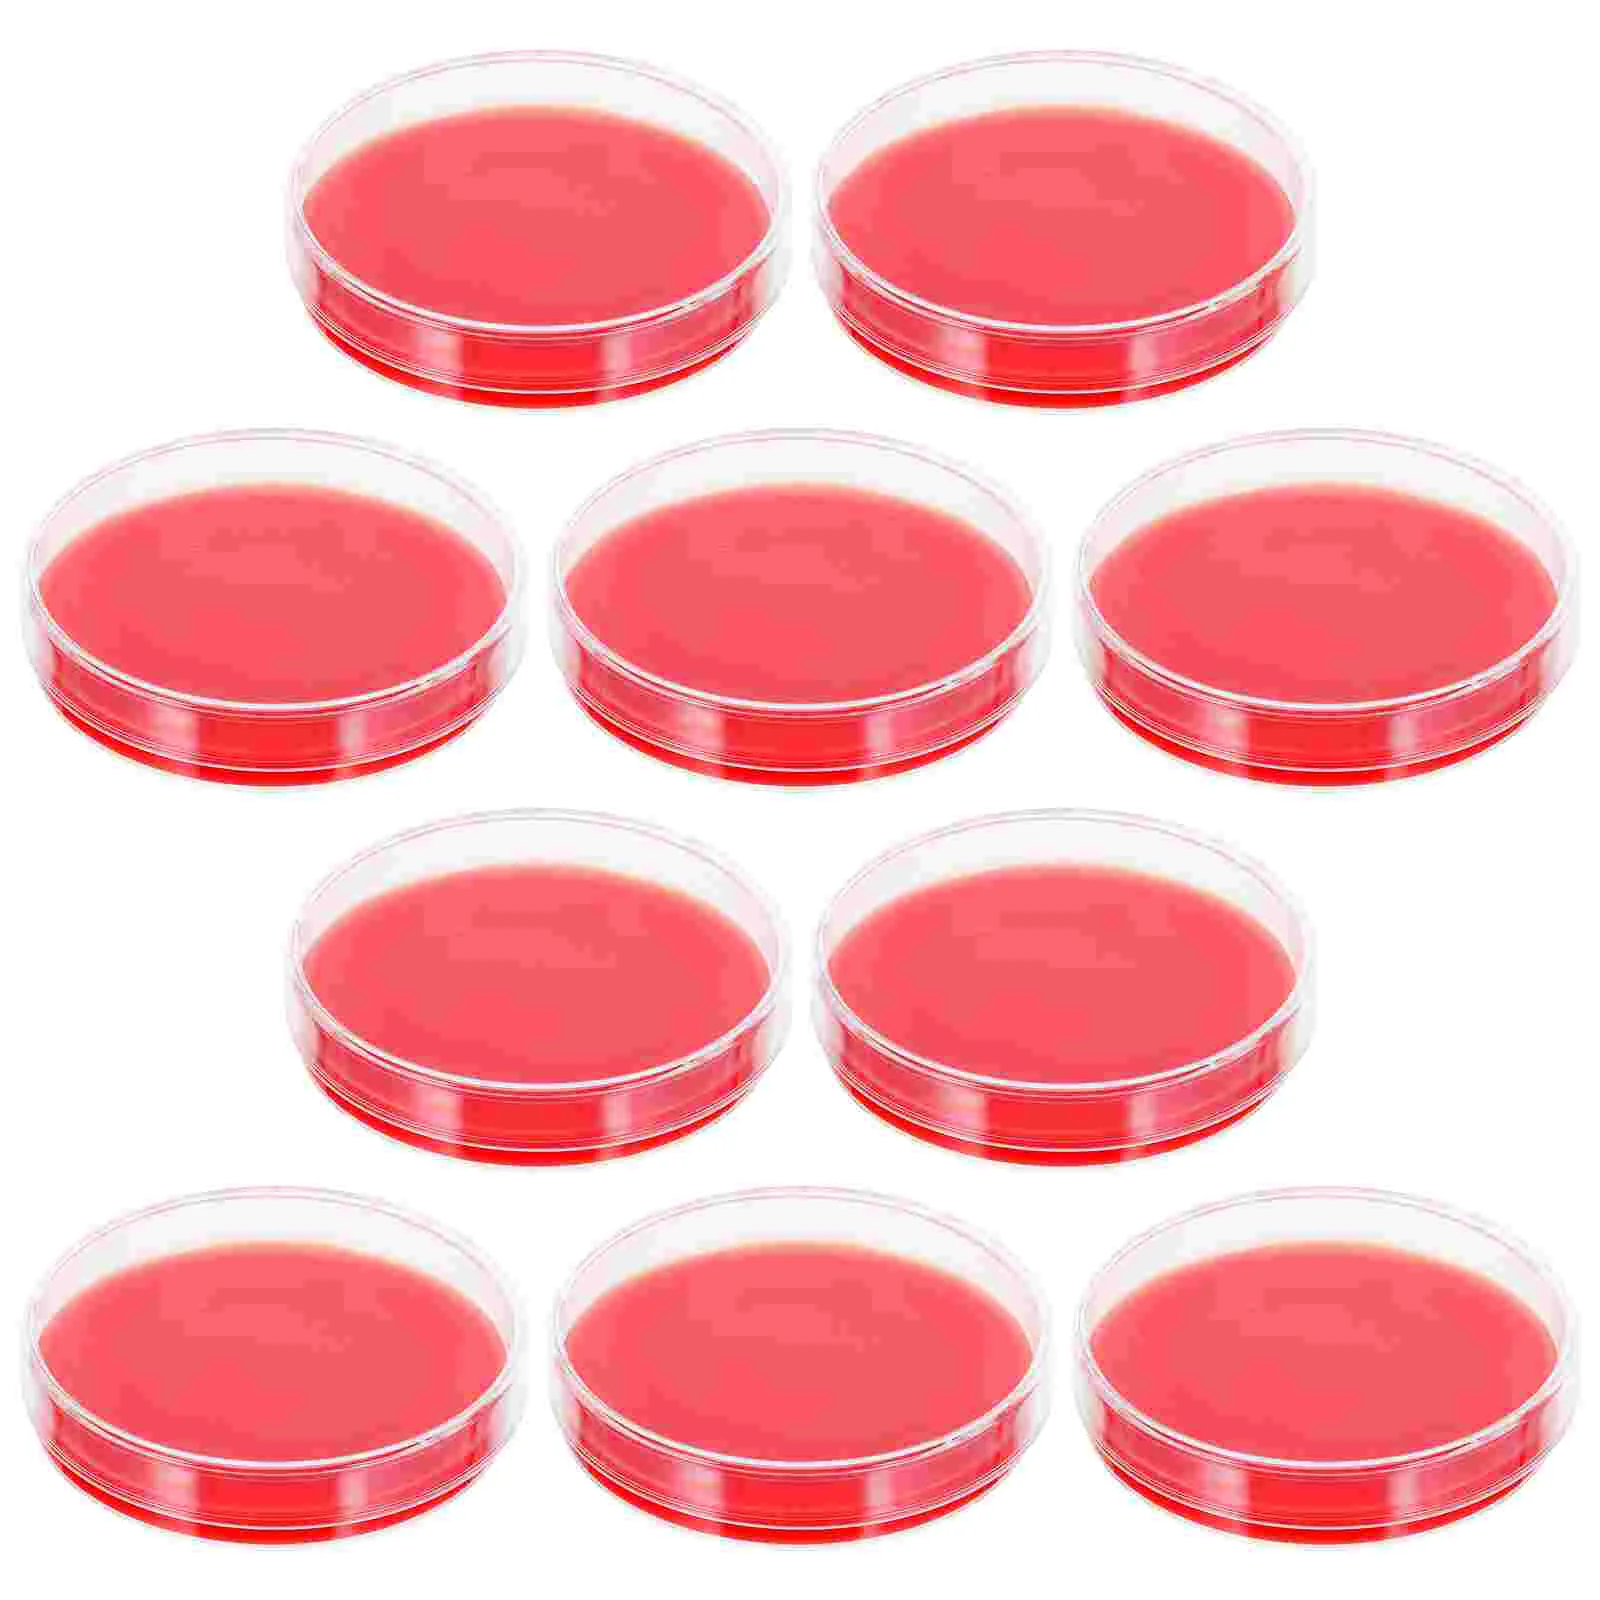 

Agar Petri Dishes Plates Medium Plate Withdish Blood Sterile Culture Science Lids Growth Prepoured Project Plasticextract Malt